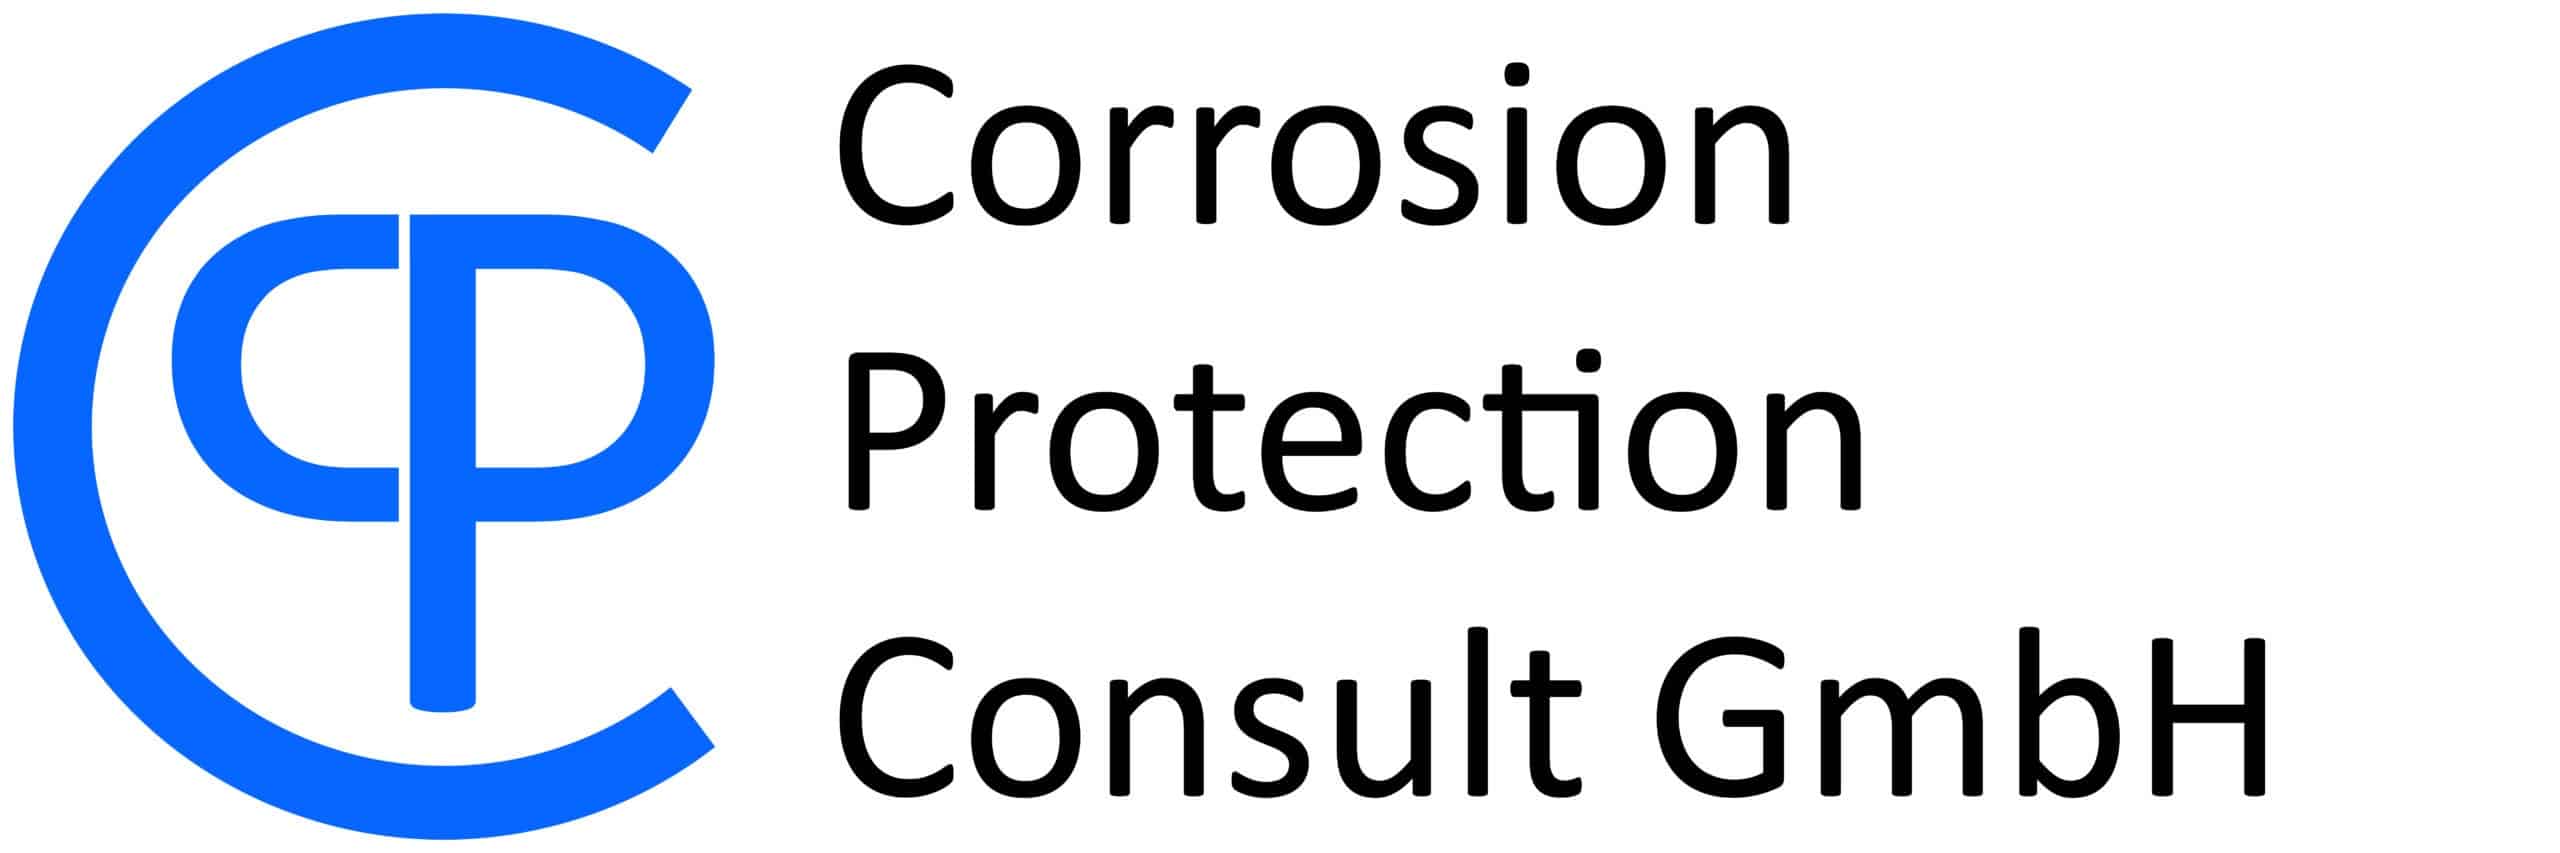 Corrosion Protection Consult GmbH